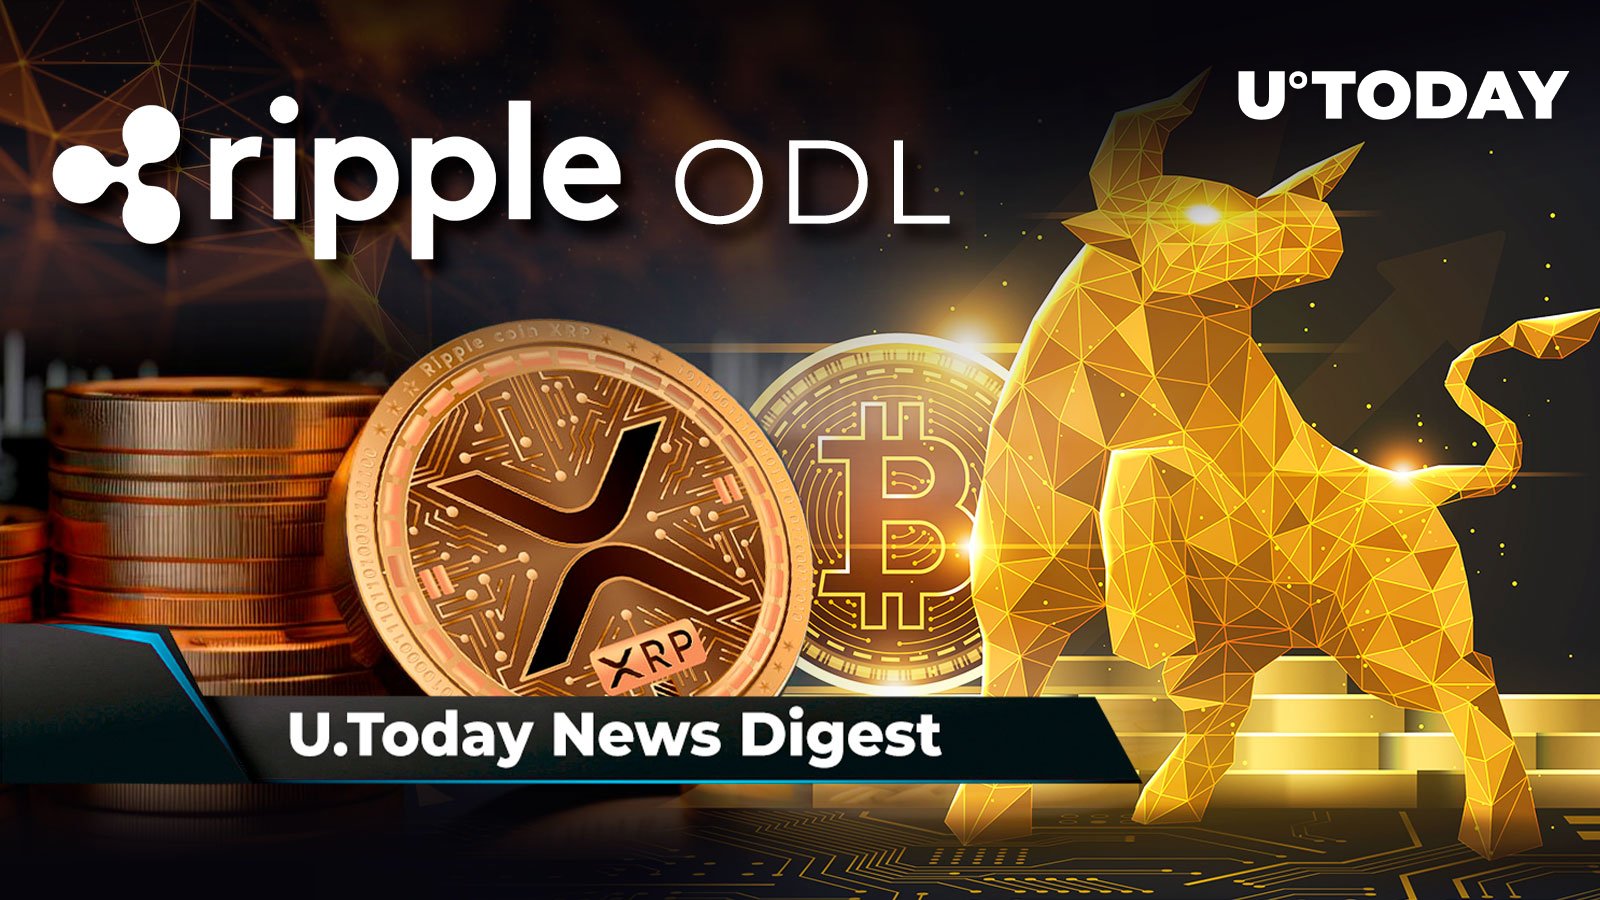 Ripple Sensationally Rebrands ODL Service, Ultra Bullish Divergence Found on Important BTC Index, BlackRock Rumored to Shift Its Focus to XRP: Crypto News Digest by U.Today